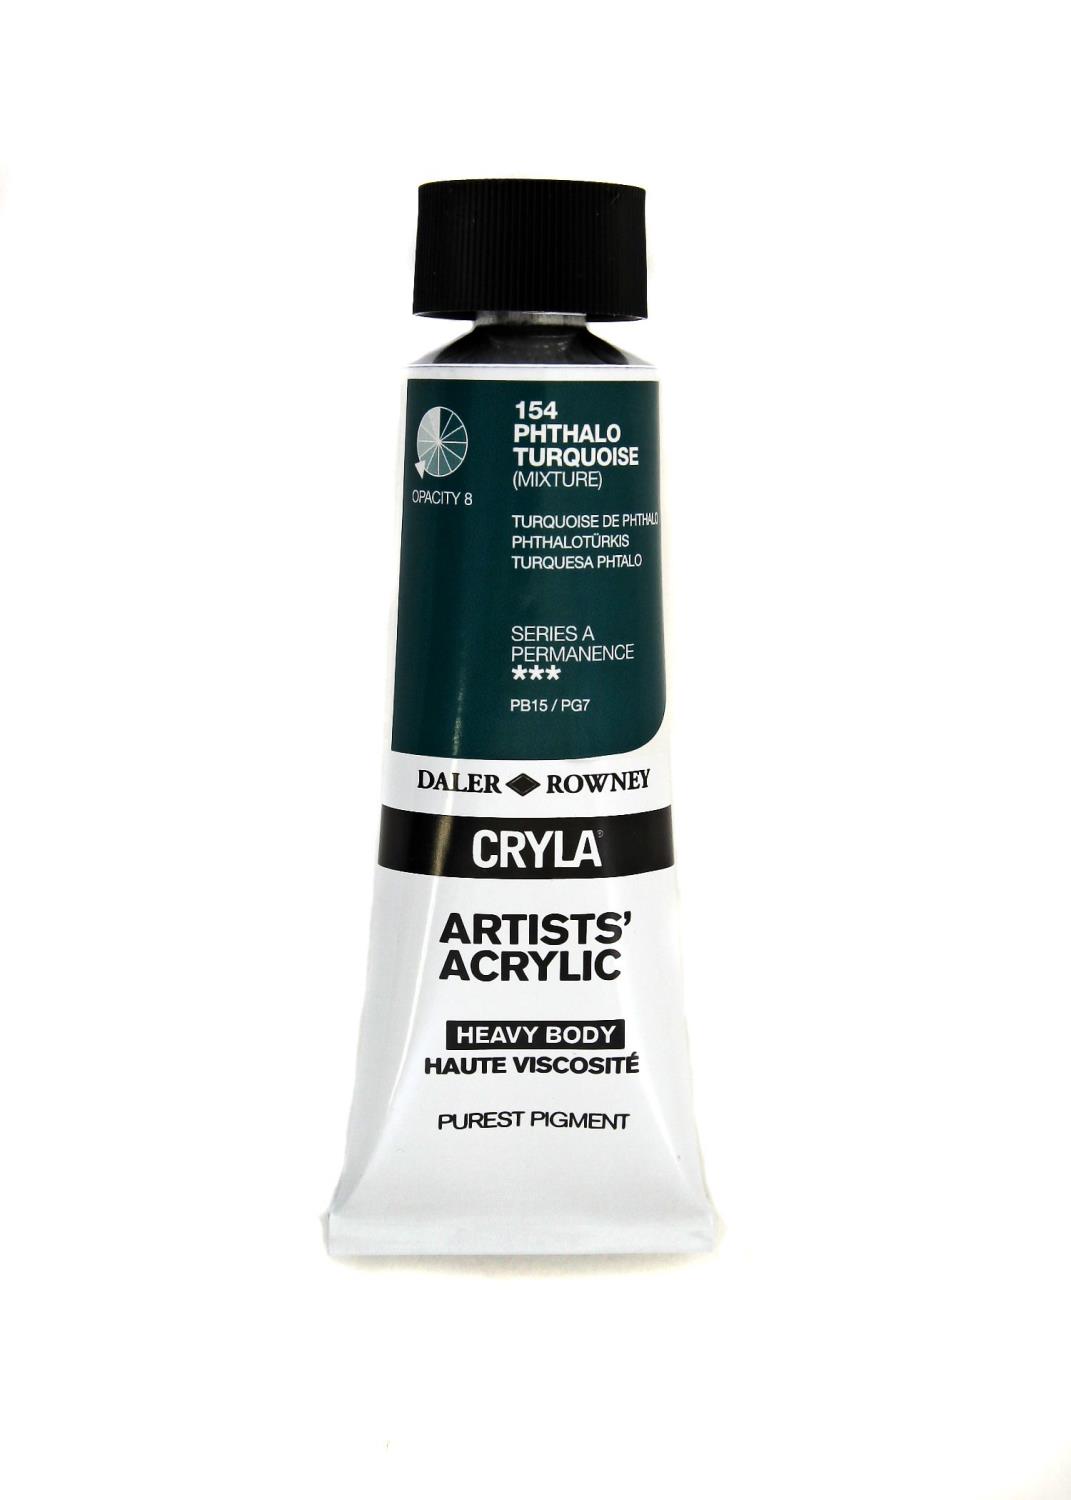 Daler Rowney Cryla 75ml 154 Phthalo Turqouise Serie A